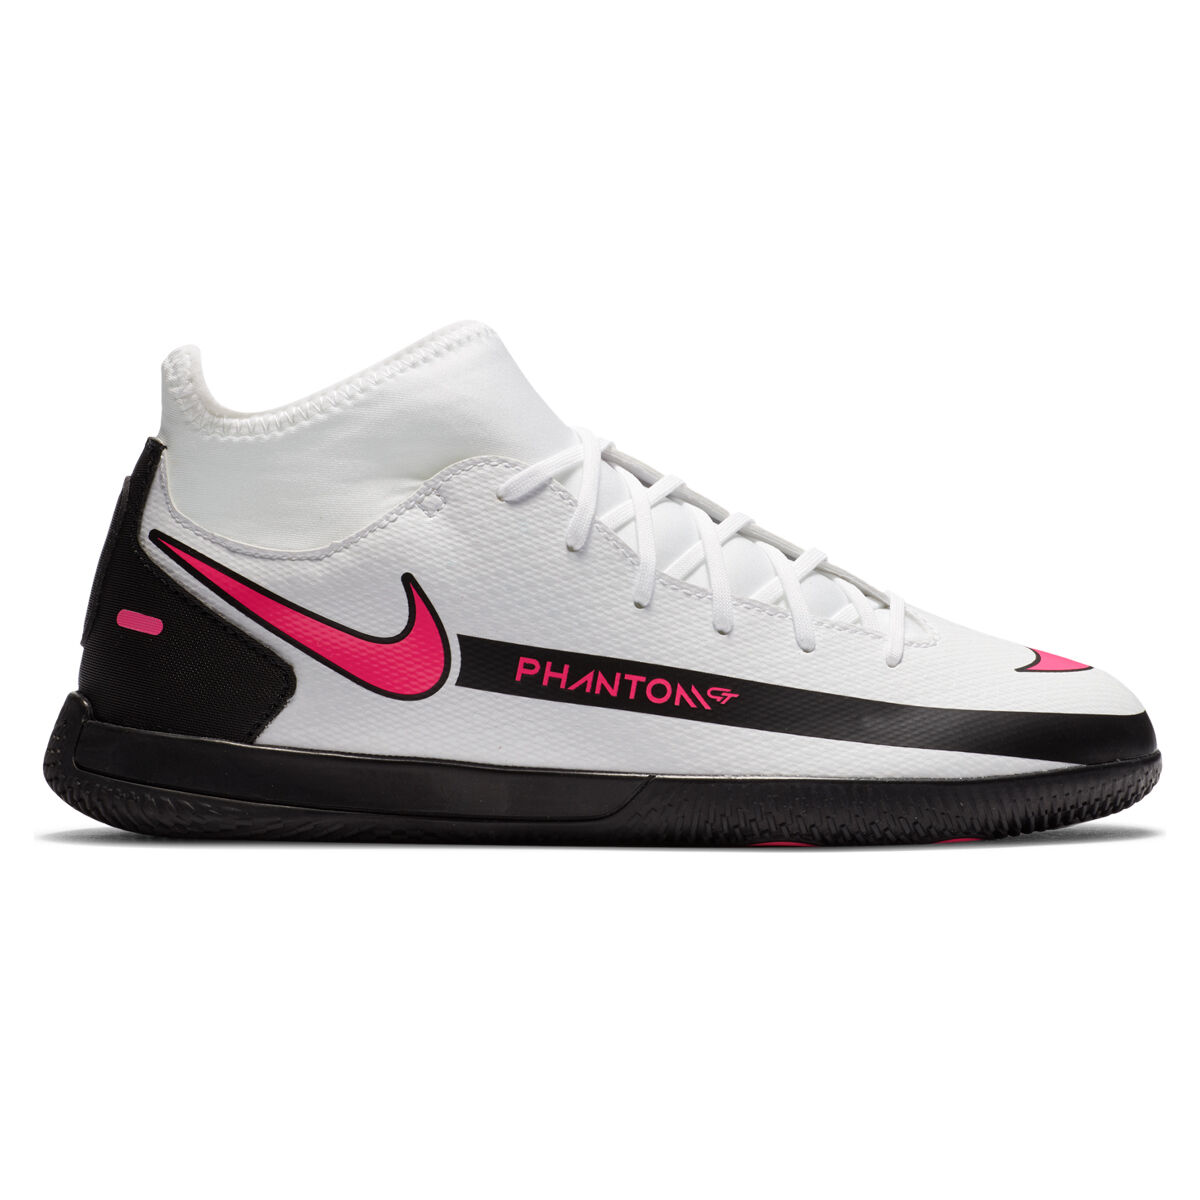 nike indoor soccer shoes boys